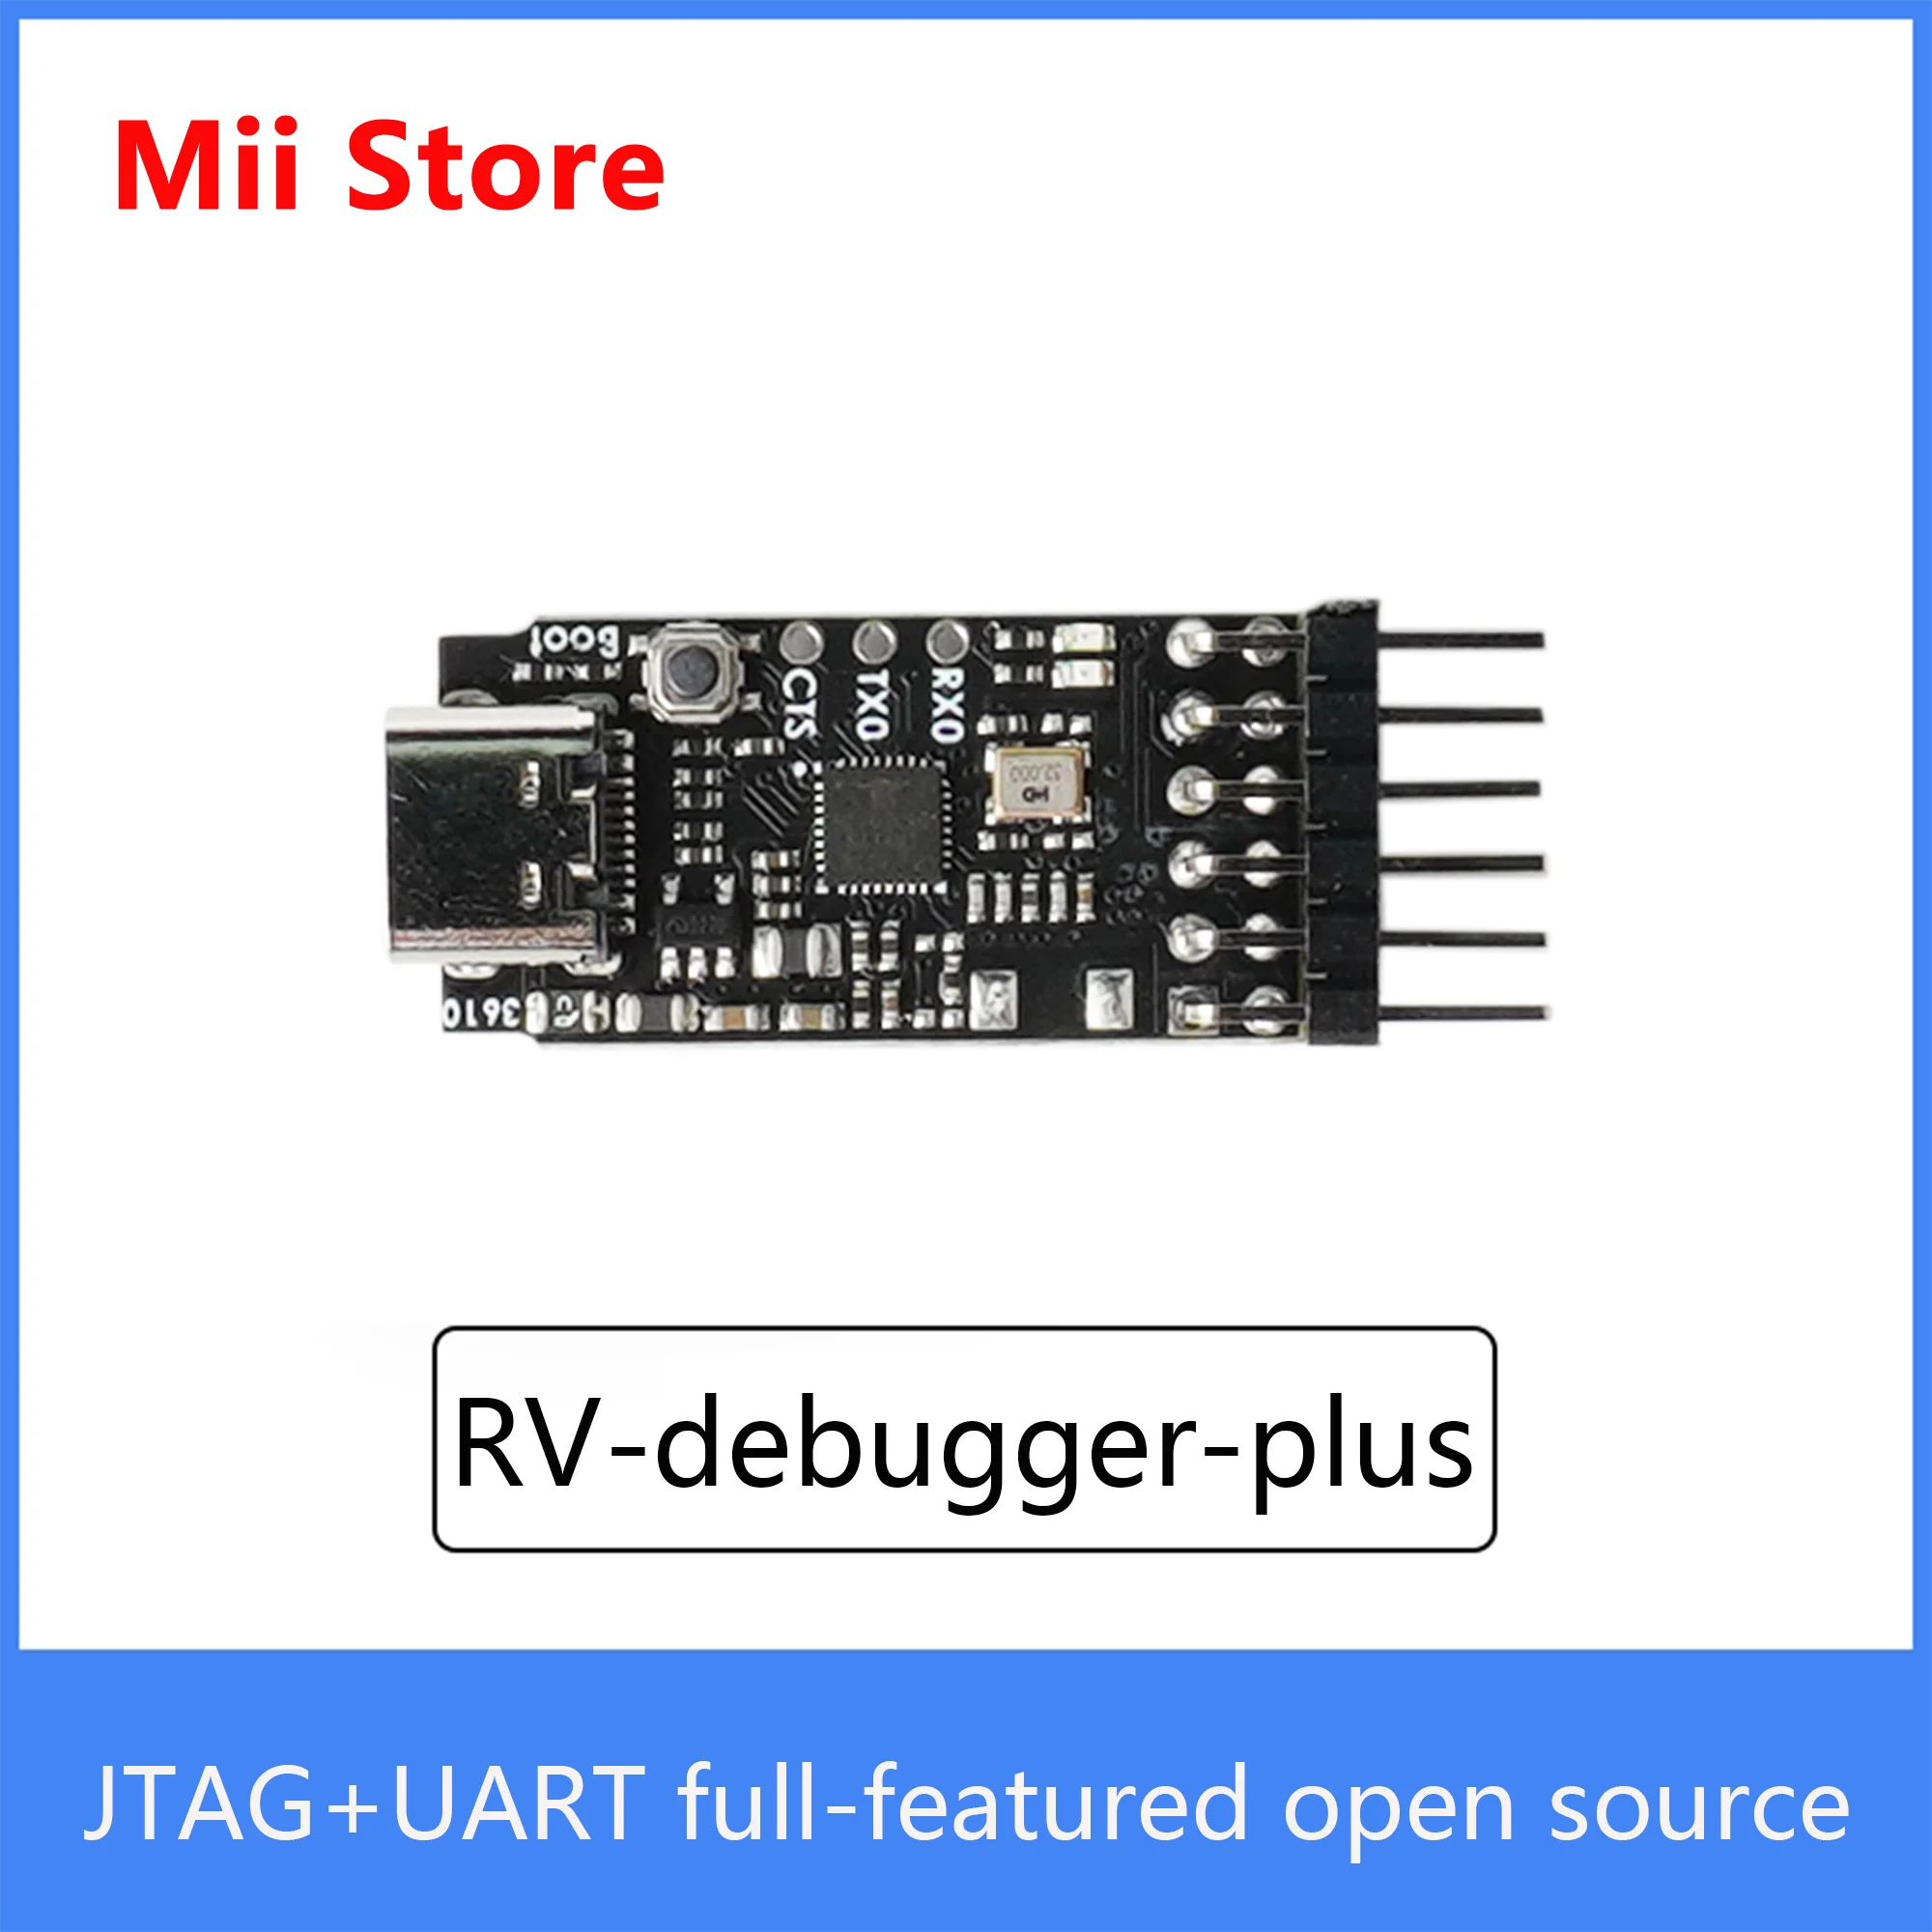 Sipeed RV debugger plus debugger, JTAG+UART full-featured open source Support Secondary development